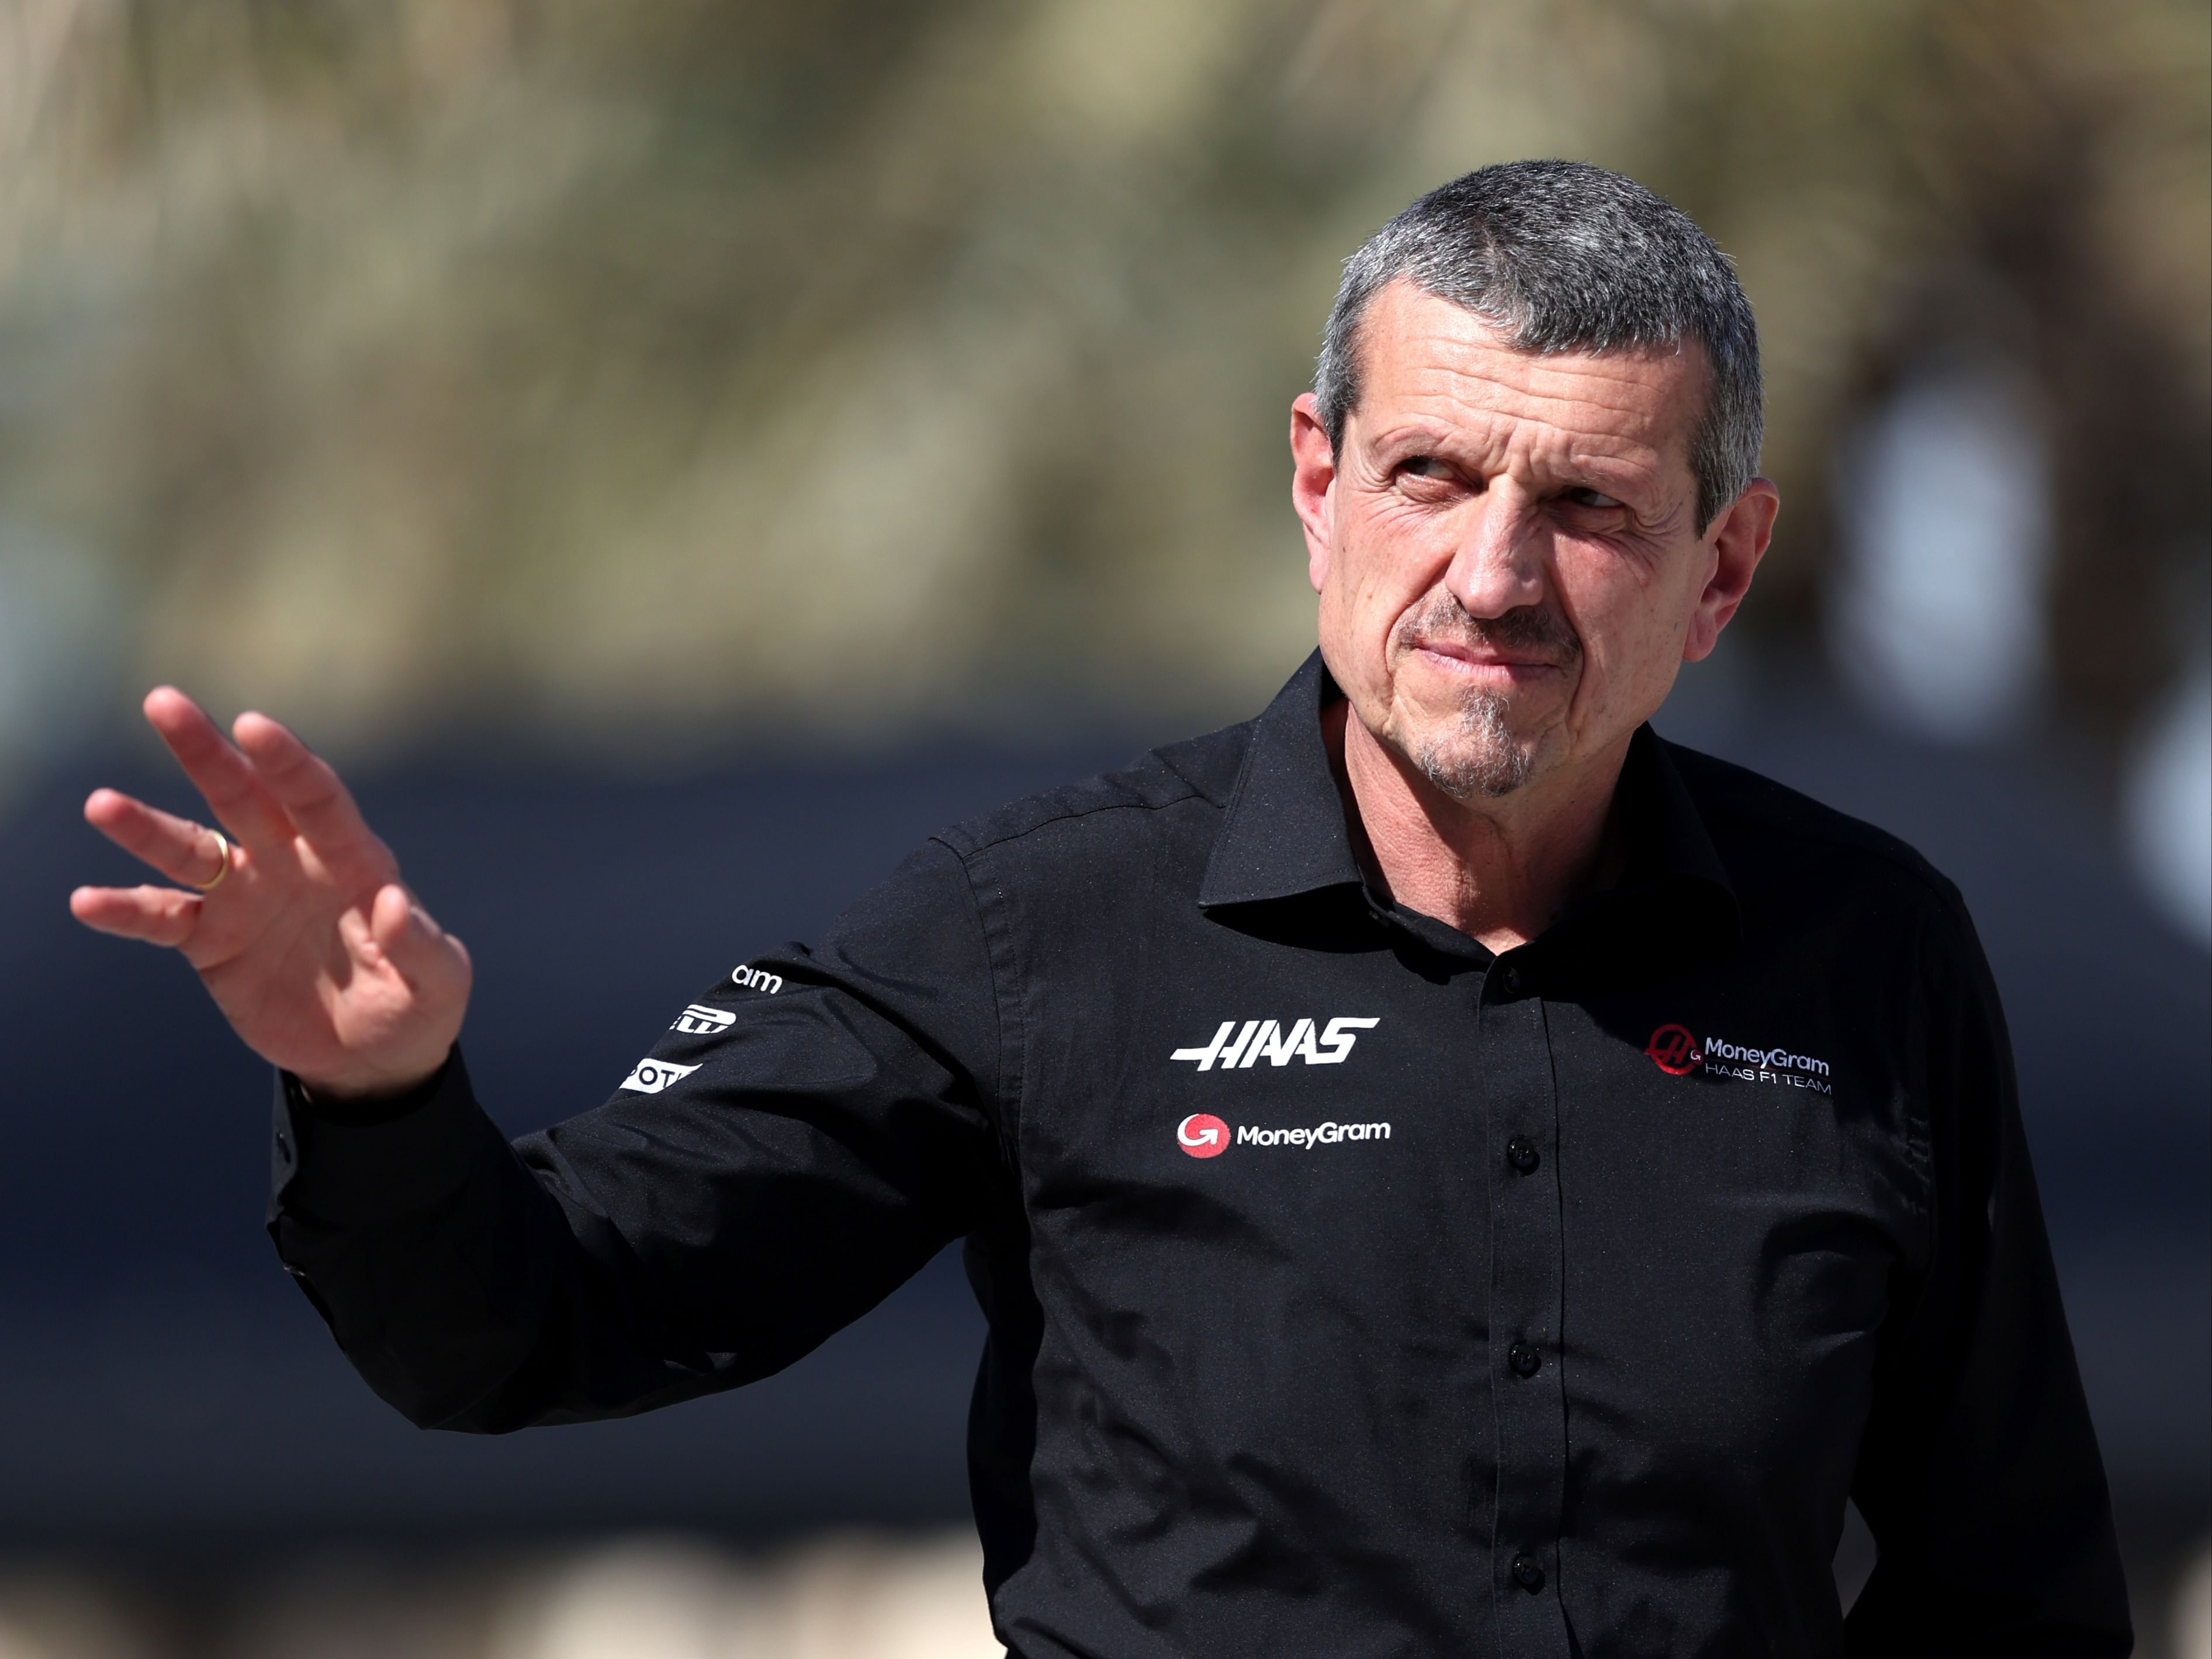 Haas F1 Team Principal Guenther Steiner walks in the paddock during previews ahead of the 2023 F1 Bahrain Grand Prix. (Photo by Lars Baron/Getty Images)